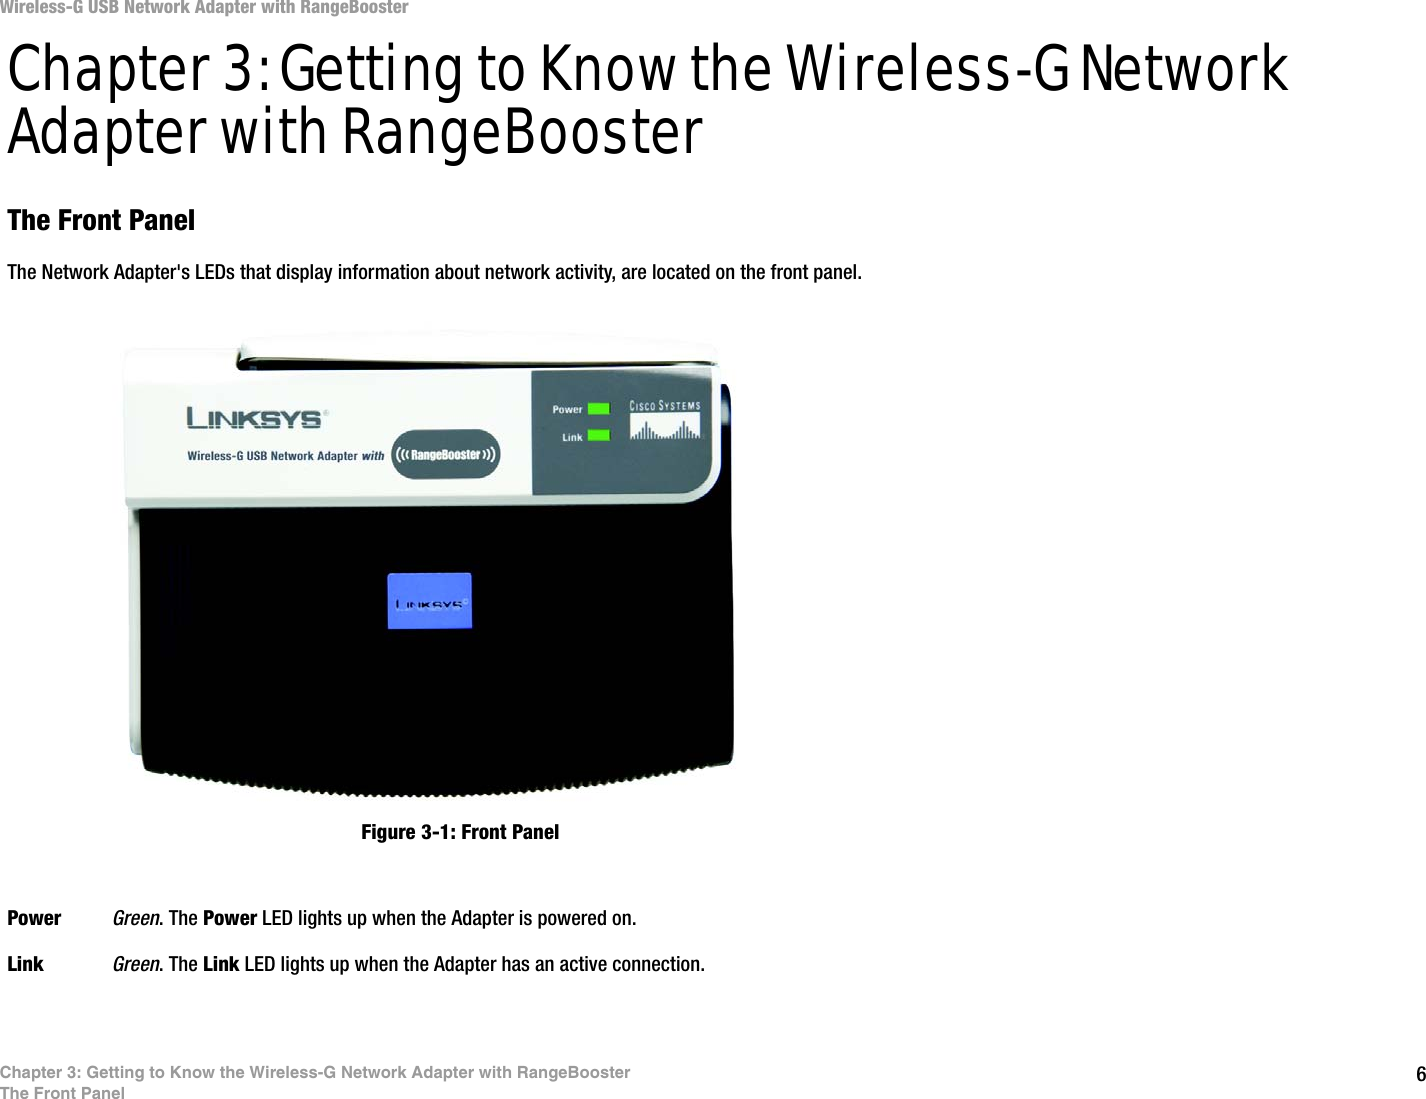 6Chapter 3: Getting to Know the Wireless-G Network Adapter with RangeBoosterThe Front PanelWireless-G USB Network Adapter with RangeBoosterChapter 3: Getting to Know the Wireless-G Network Adapter with RangeBoosterThe Front PanelThe Network Adapter&apos;s LEDs that display information about network activity, are located on the front panel.Power Green. The Power LED lights up when the Adapter is powered on.Link Green. The Link LED lights up when the Adapter has an active connection. Figure 3-1: Front Panel